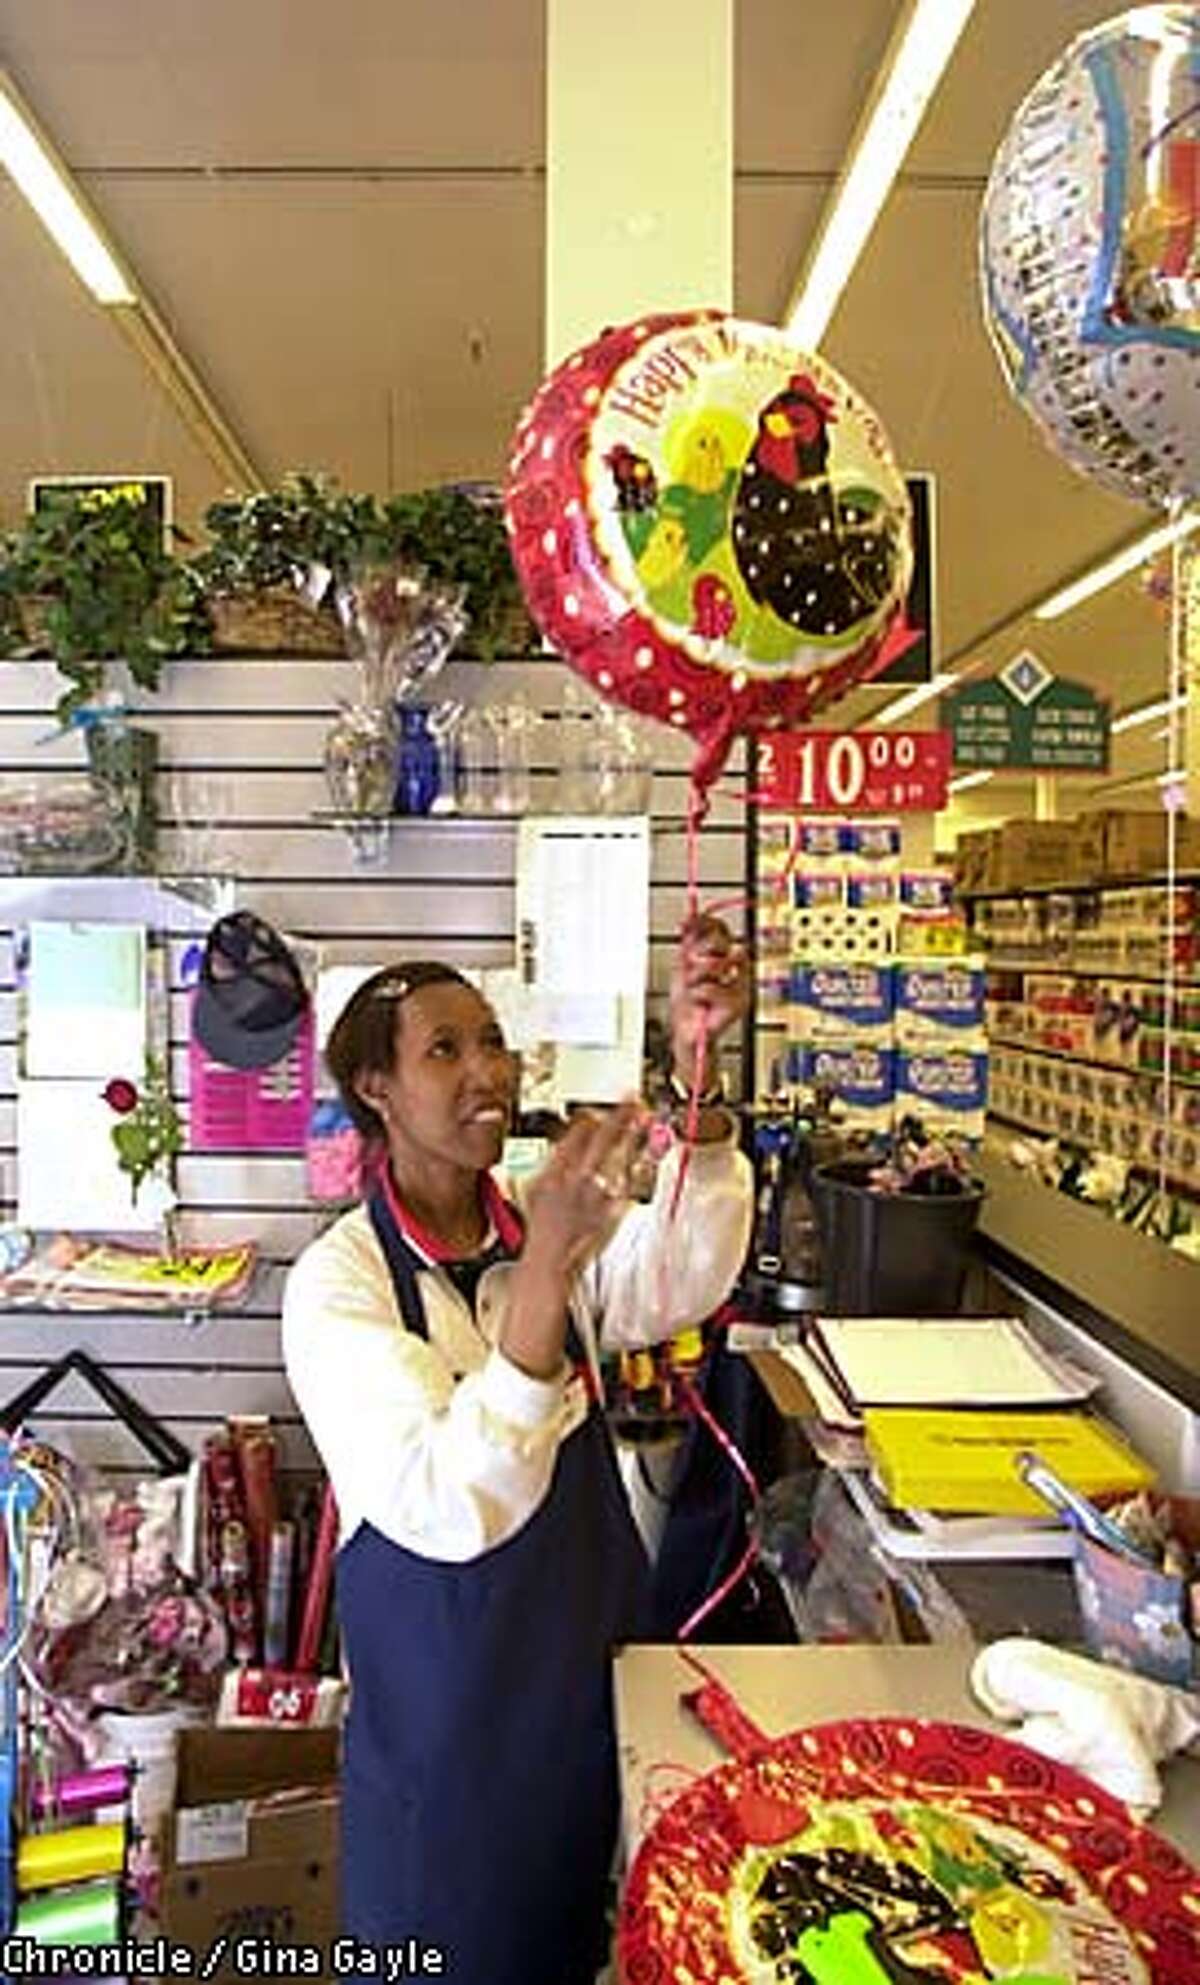 Sonia Jackson finished work on a Mother's Day balloon at a Hayward Safeway store. Chronicle photo by Gina Gayle